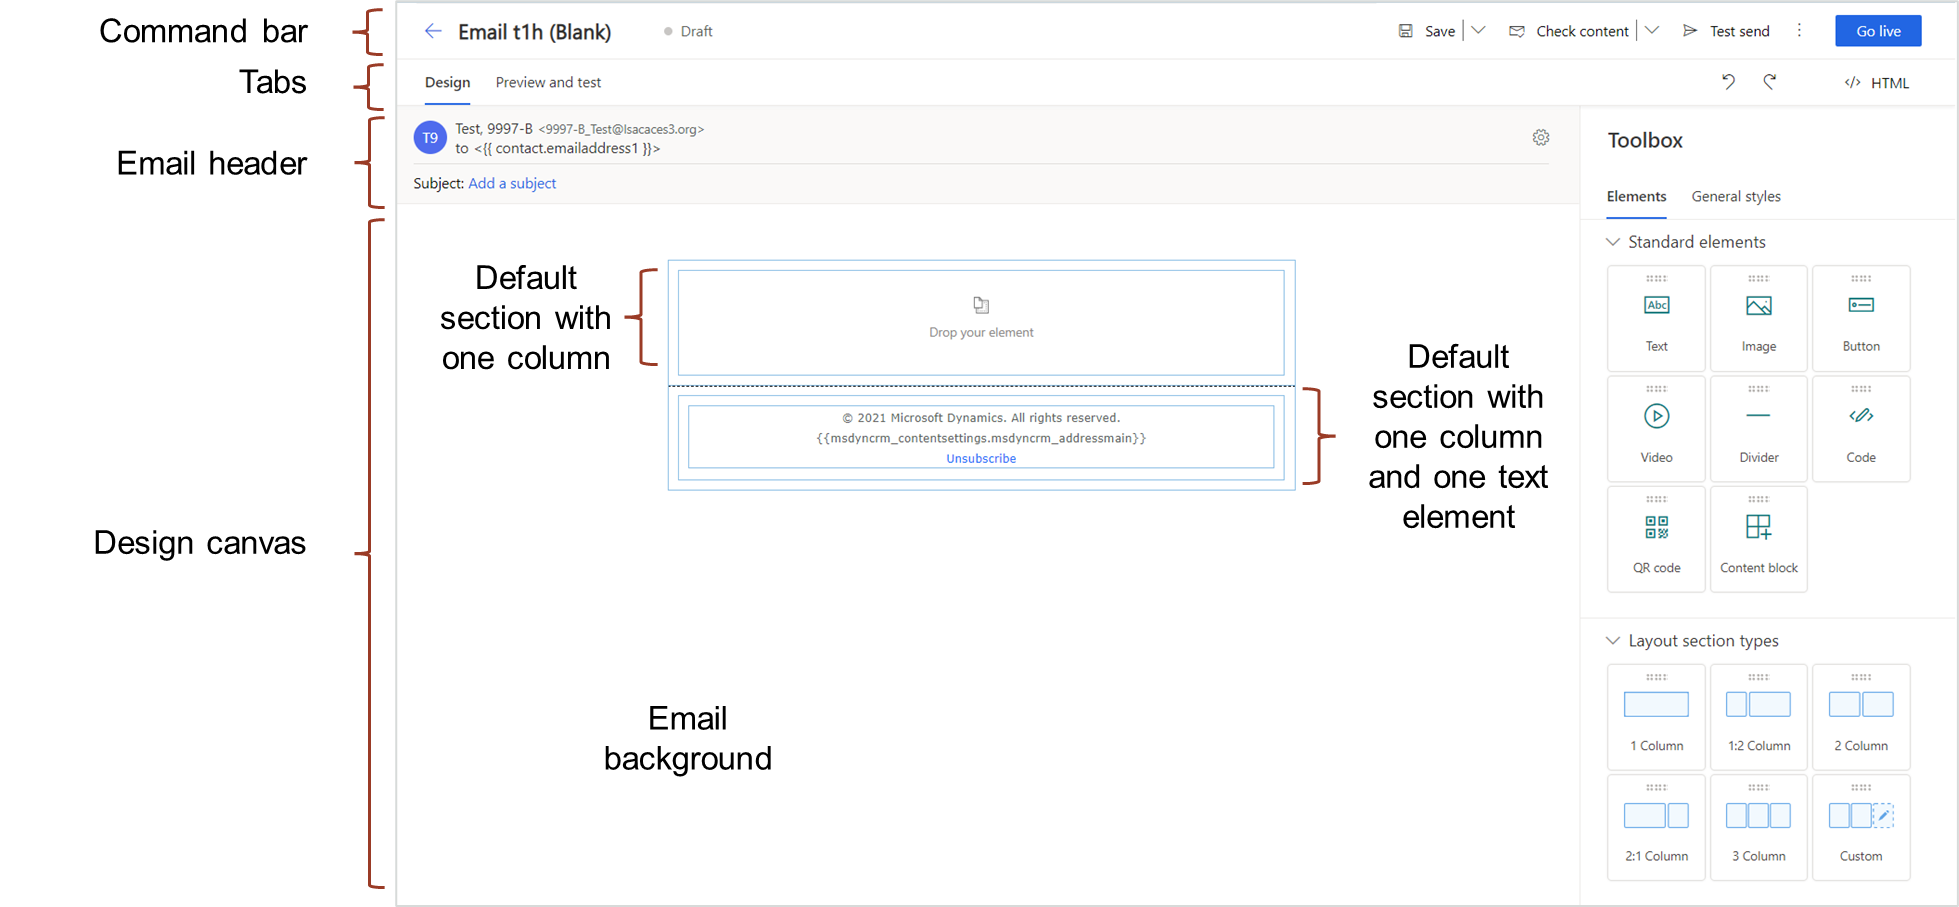 Image shows an email canvas with labeled sections and design elements.